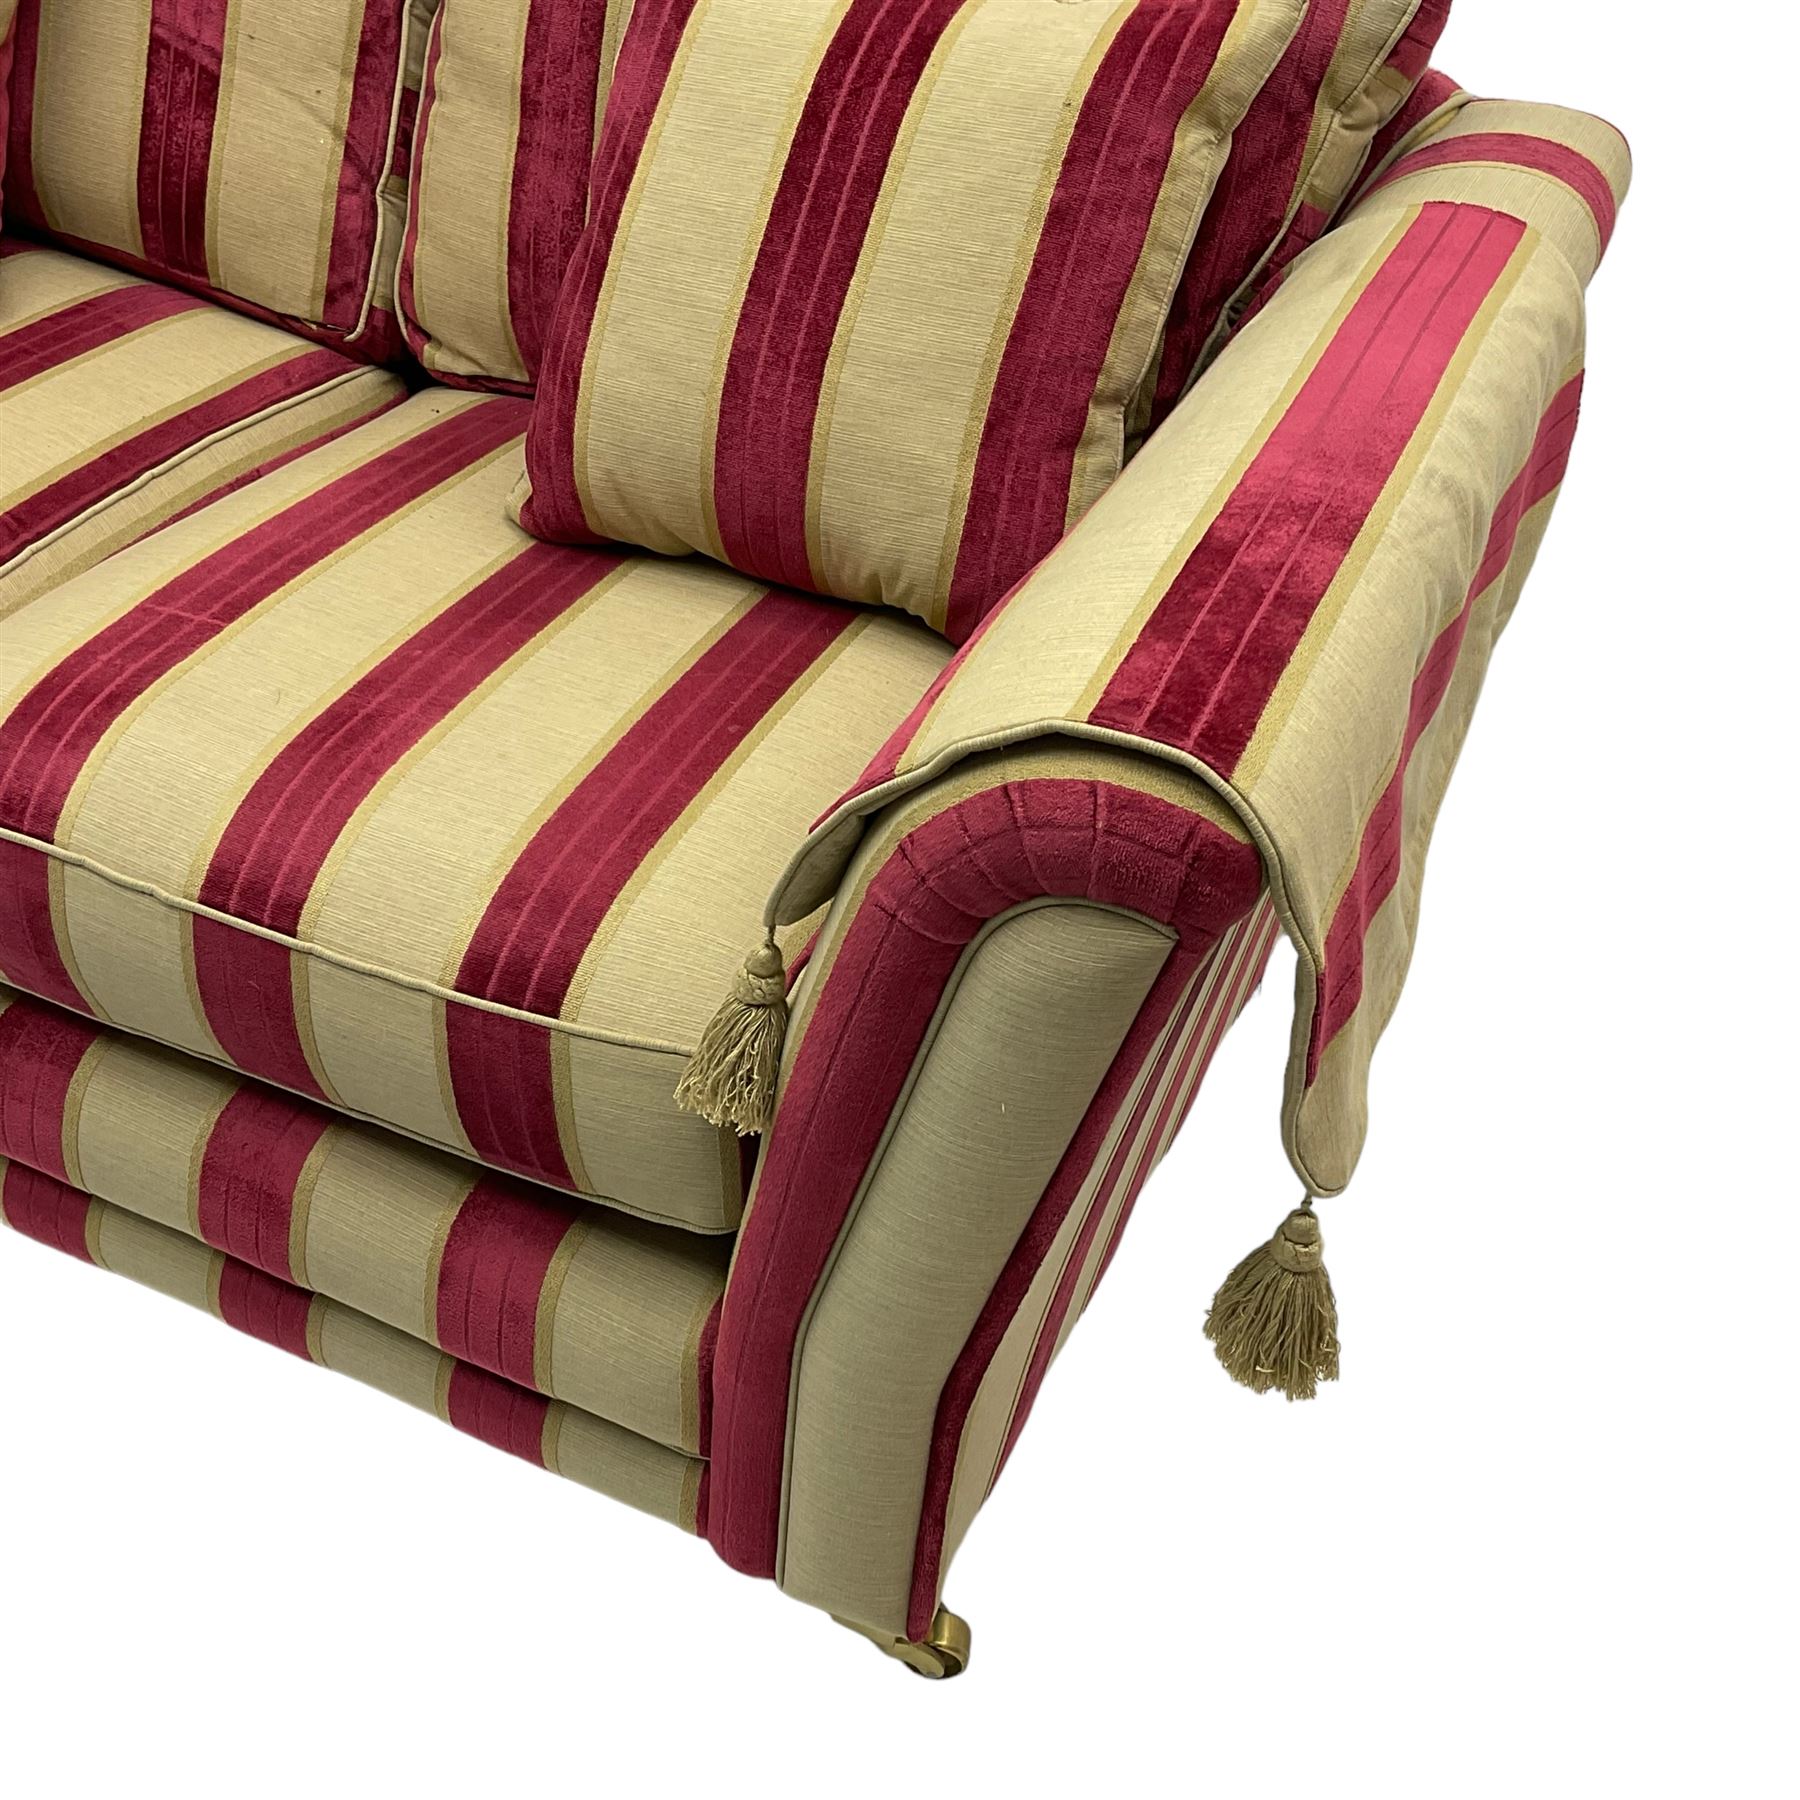 Three-piece lounge suite - large two-seat sofa upholstered in red and gold striped fabric (W185cm - Image 17 of 24